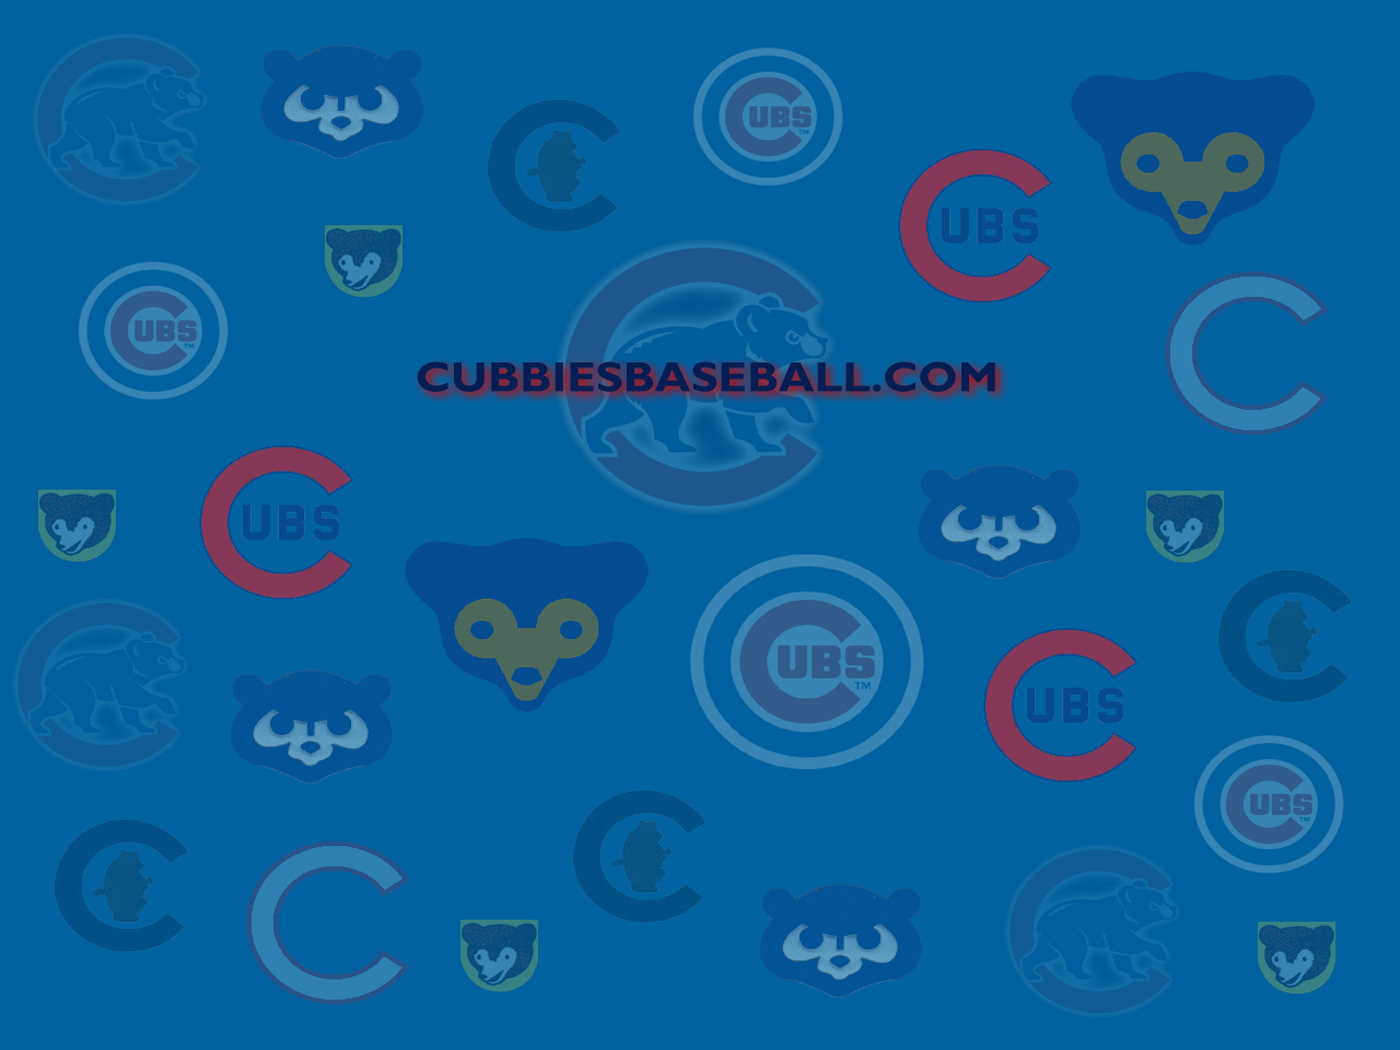  Baseball   Chicago Cubs Merchandise Apparel Tickets News and More 1400x1050